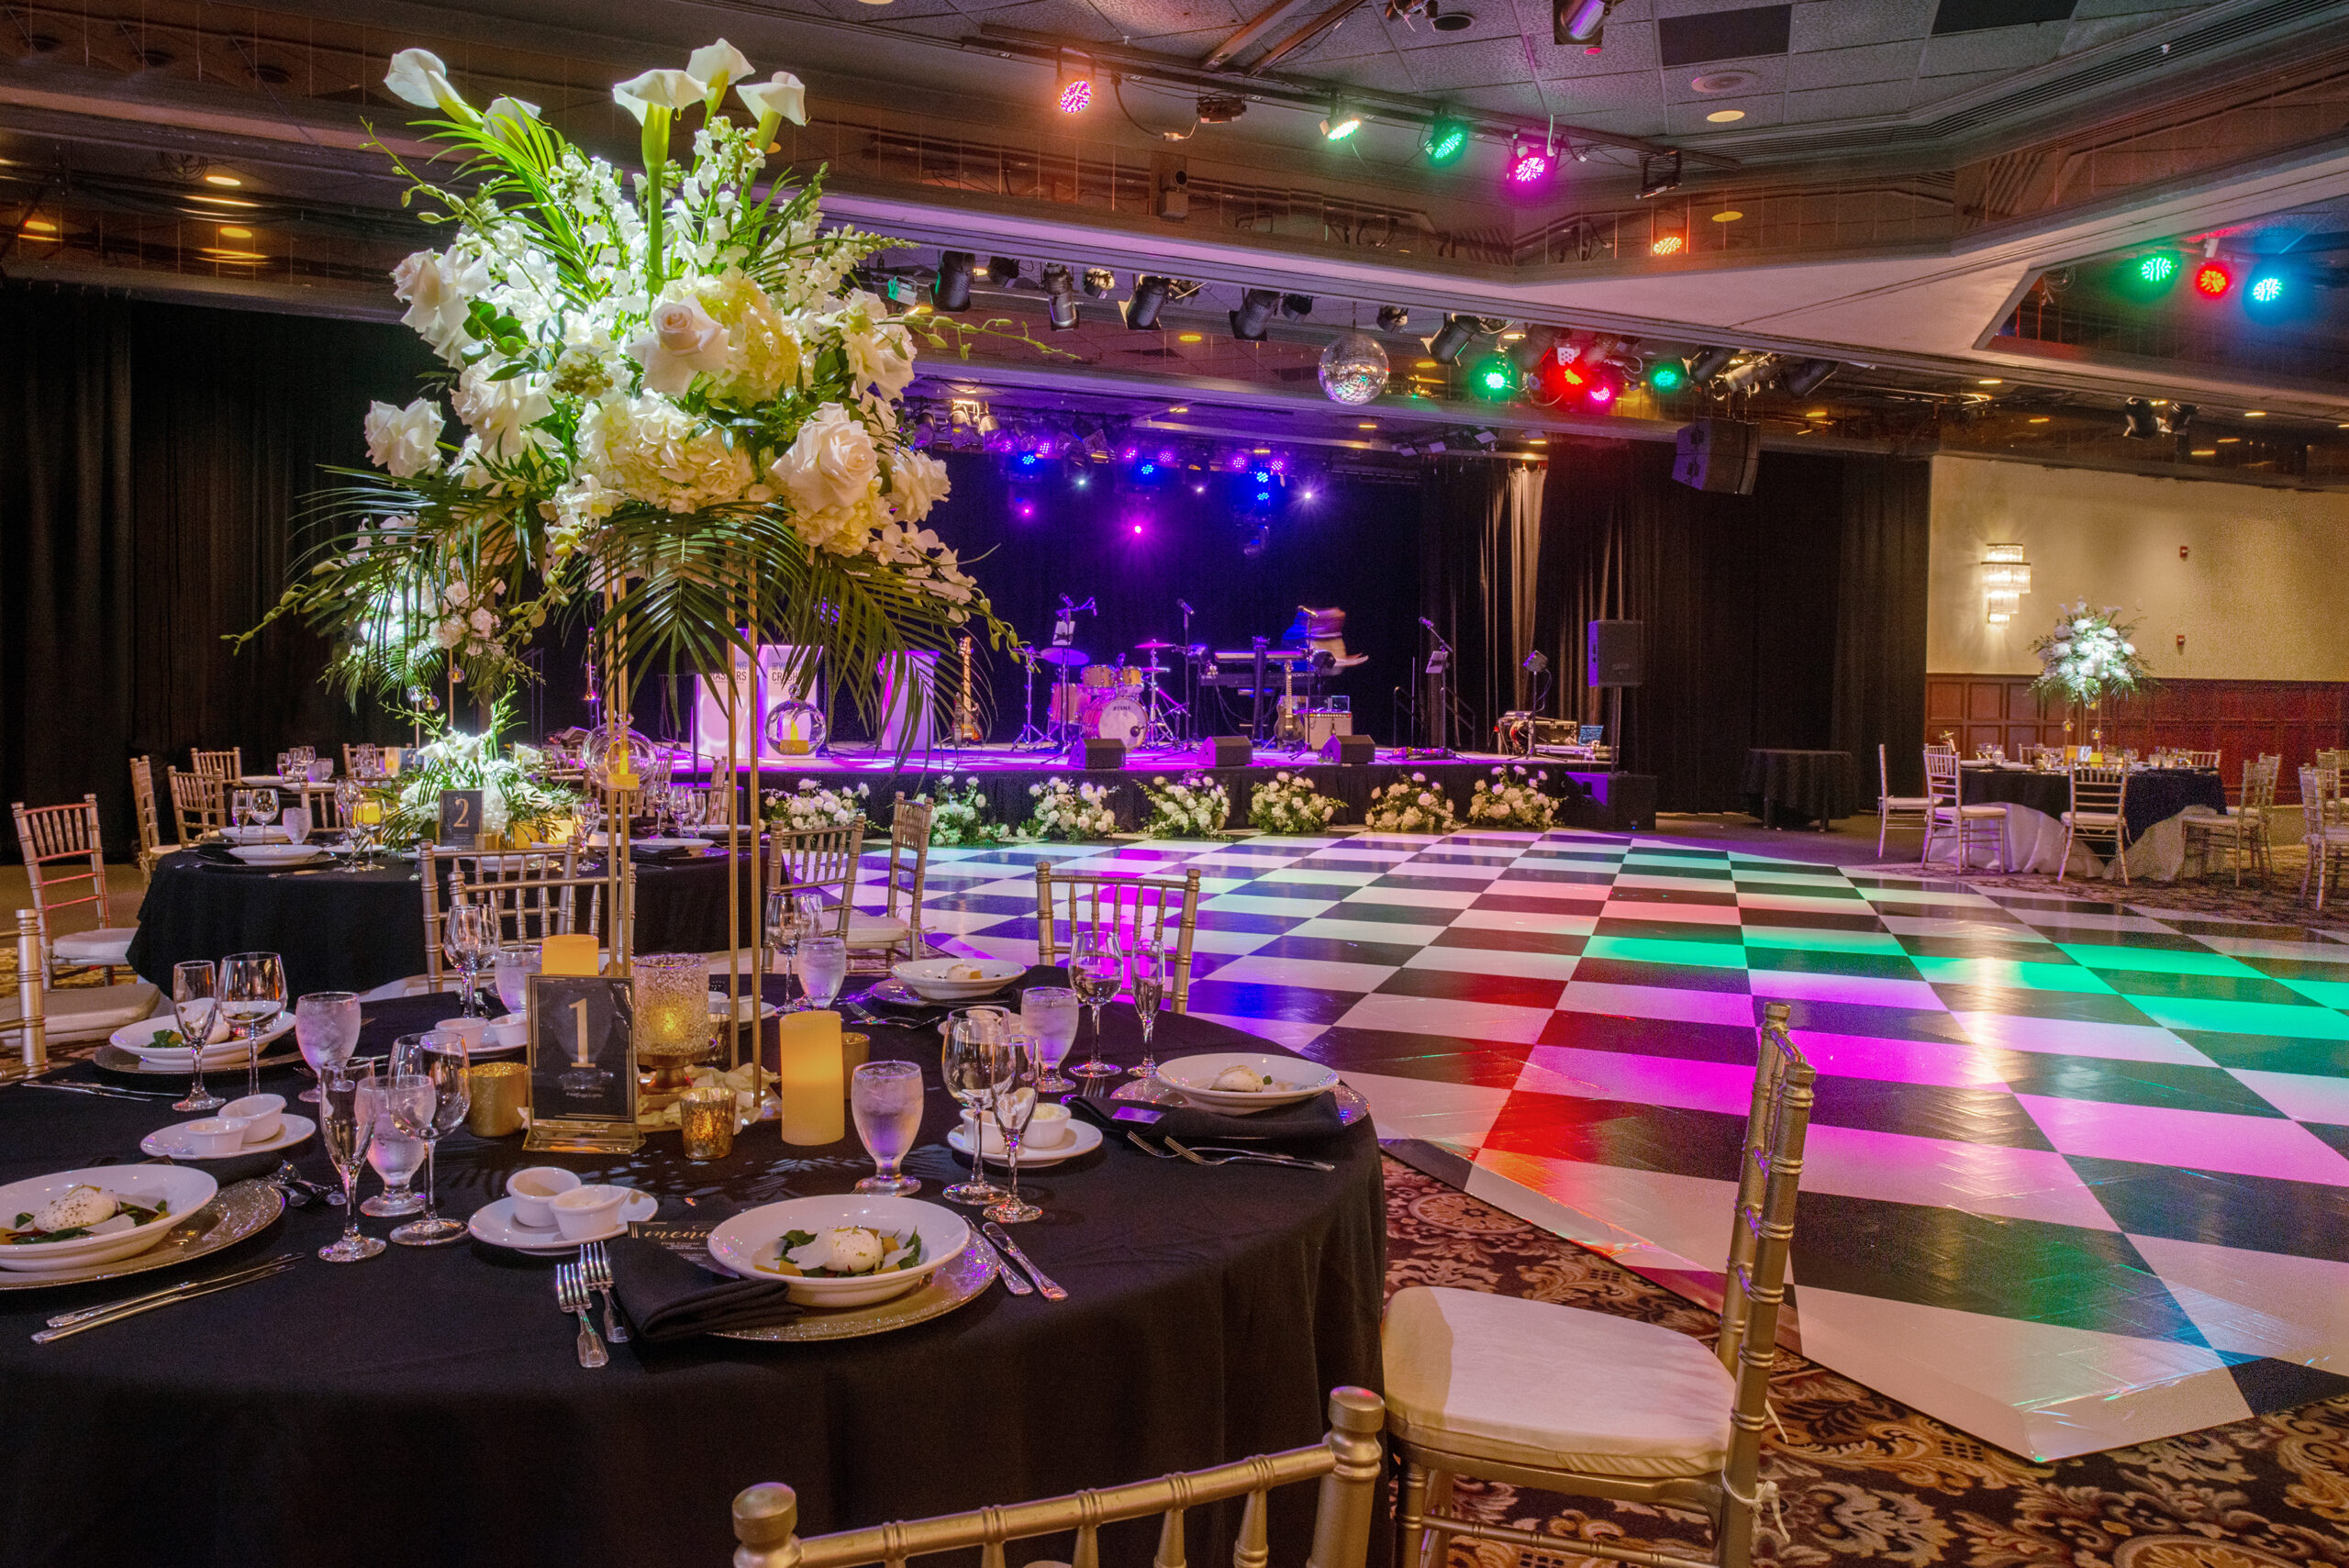 A wedding at Resorts Casino Hotel, a wedding venue in New Jersey.